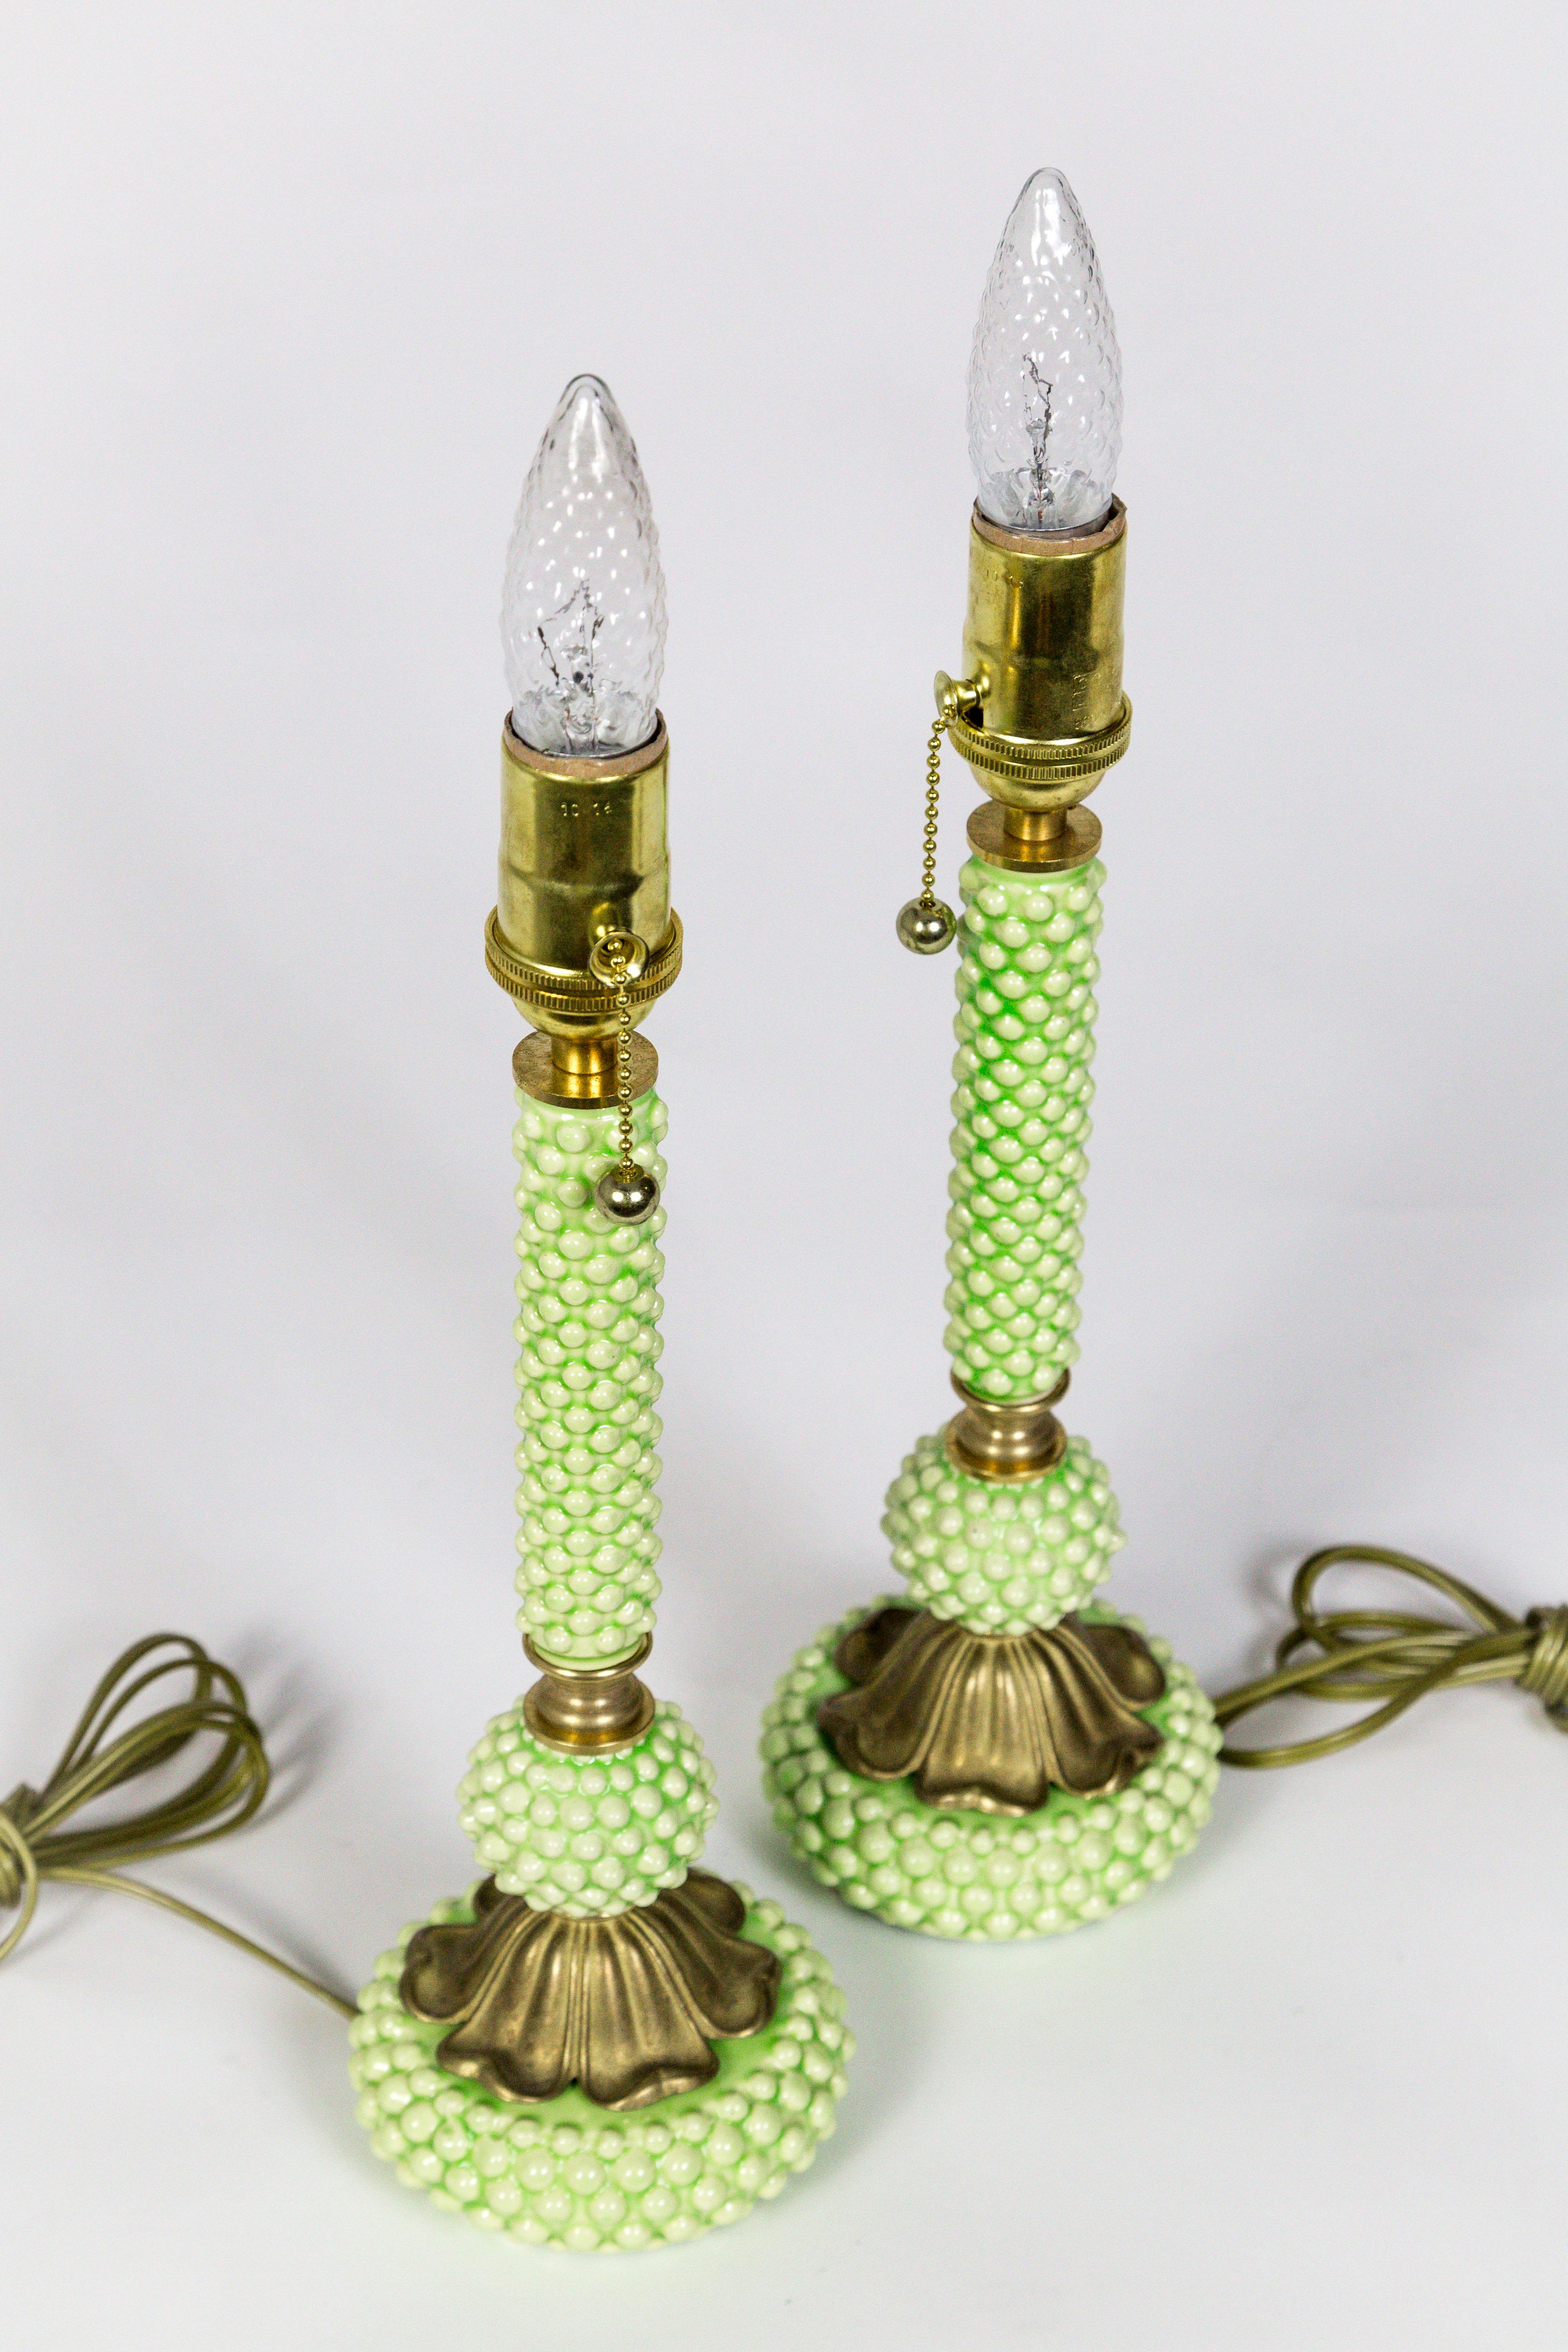 20th Century Midcentury Green Hobnail Ceramic and Brass Lamps 'Pair'